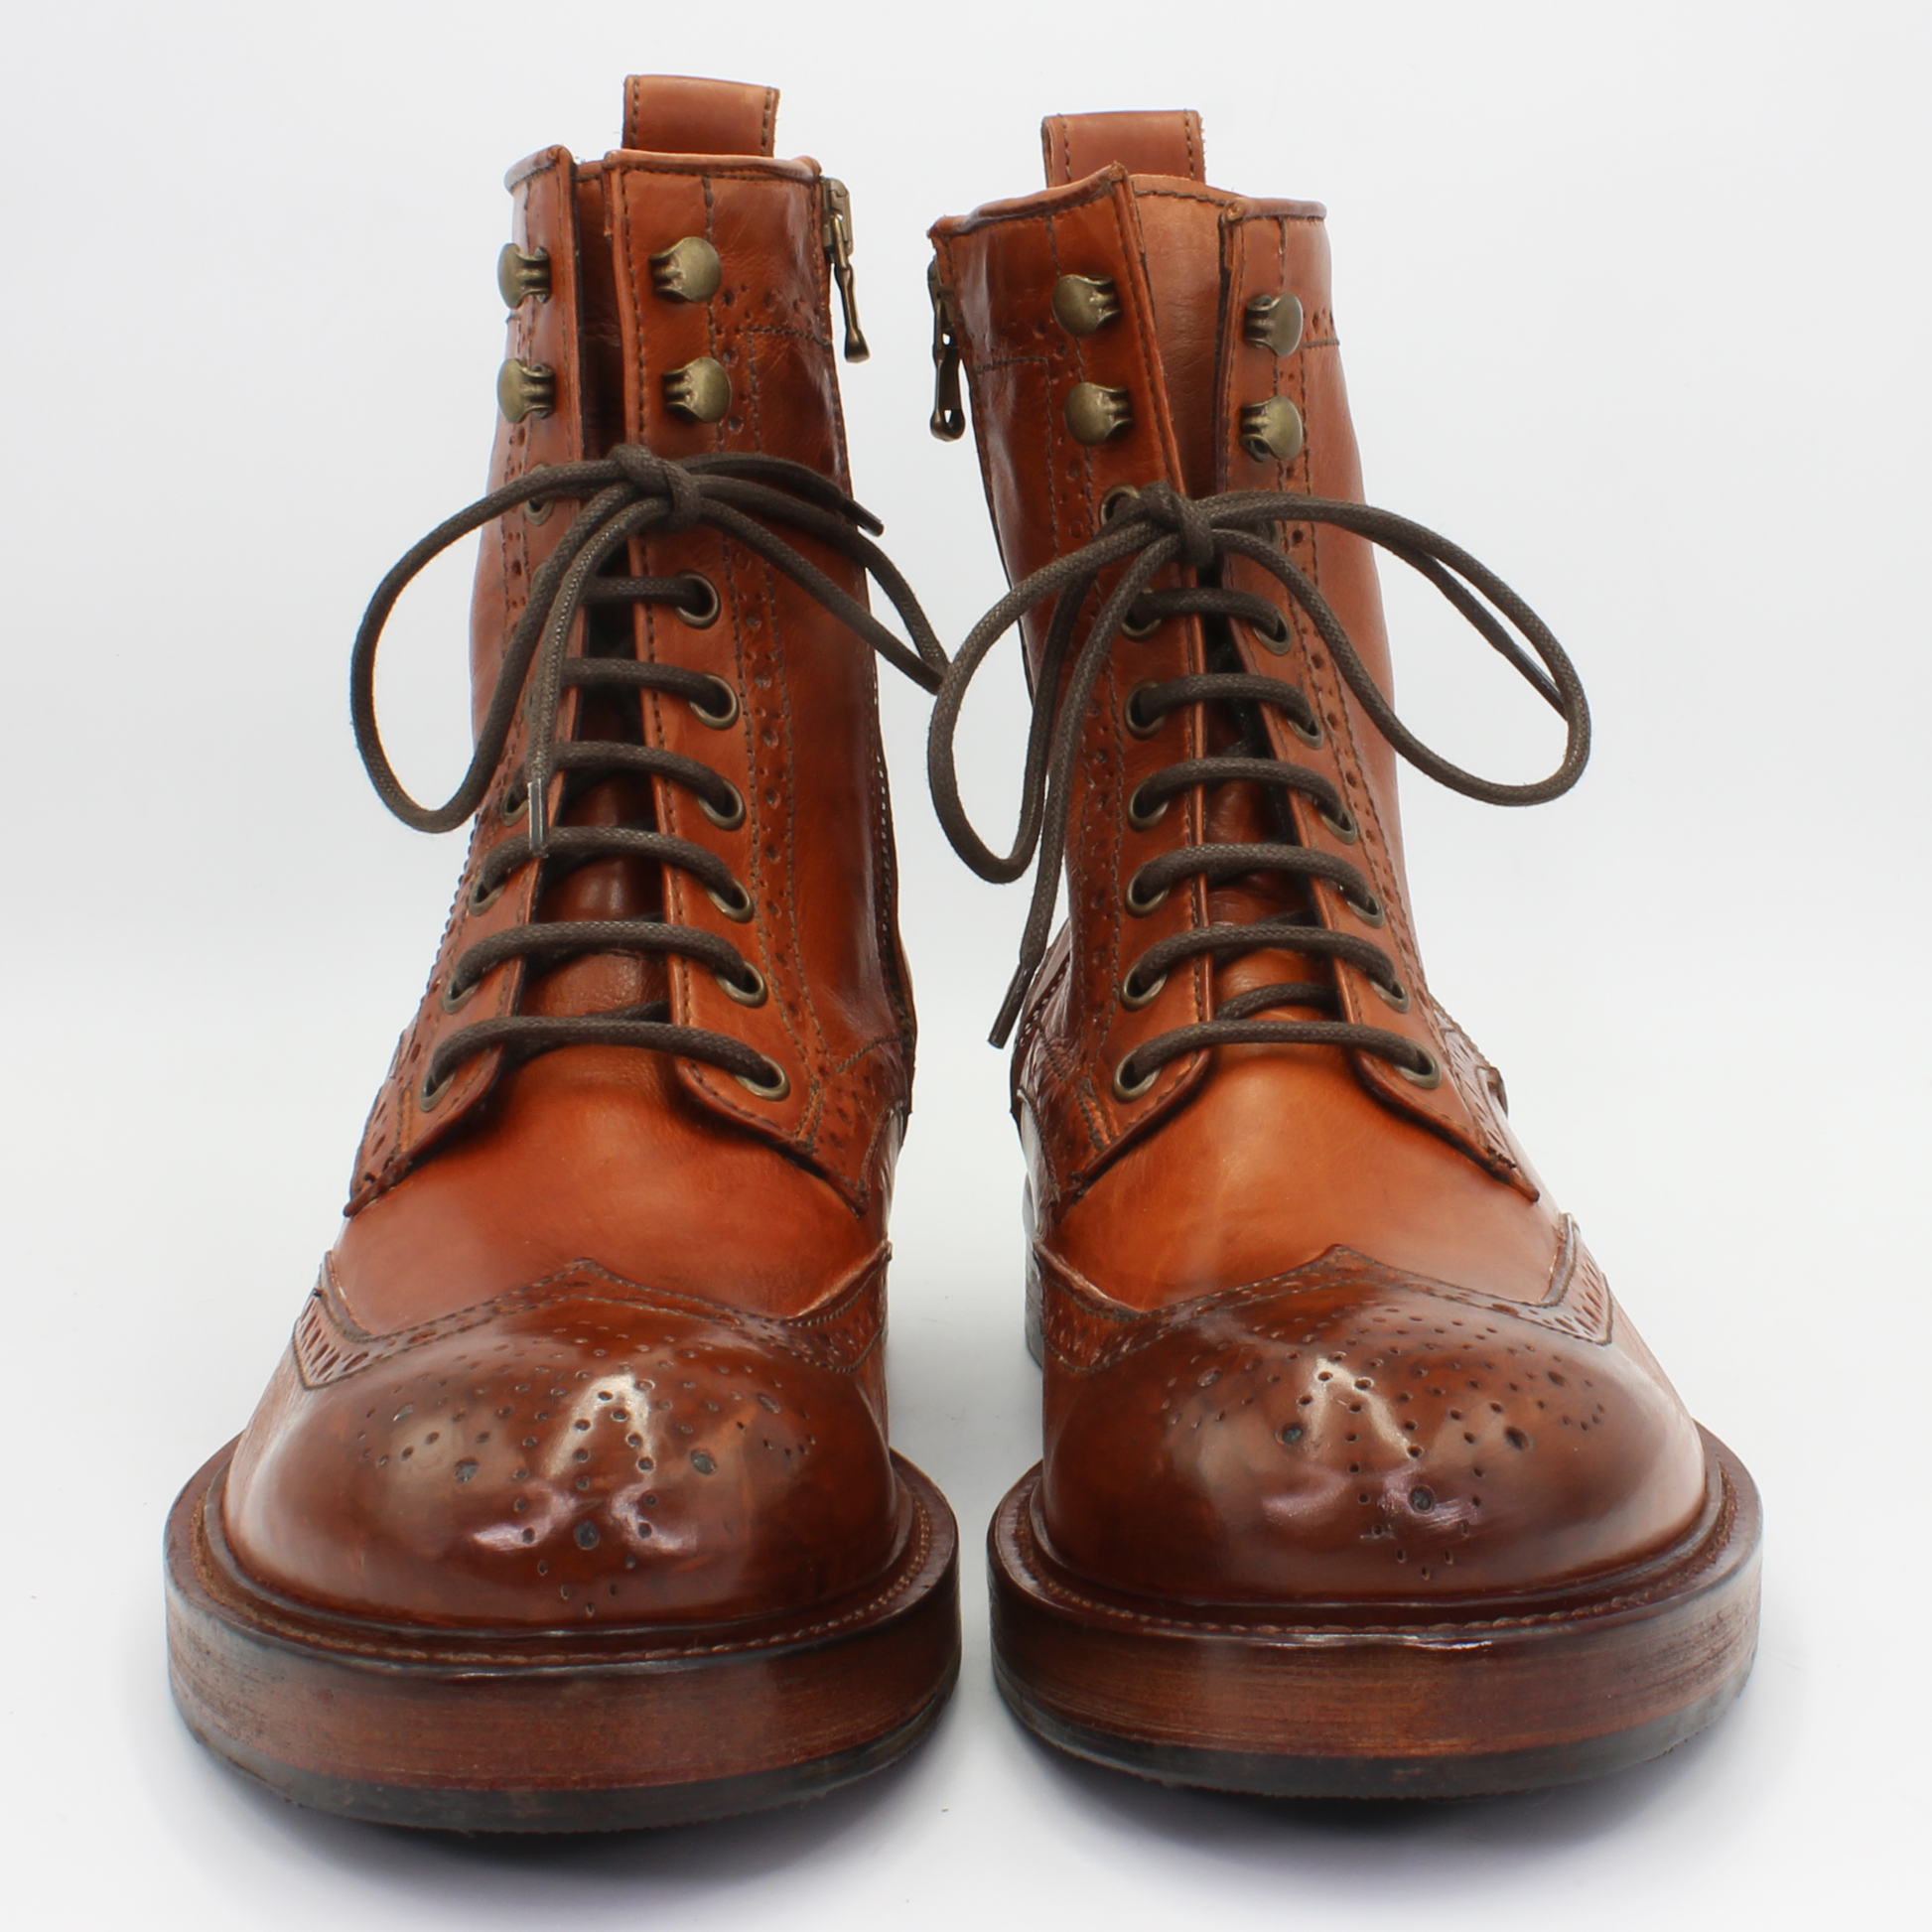 Shop Handmade Italian Leather Brogue Lace-up Ankle Boot in Cuoio Tan (JP35773/39) or browse our range of hand-made Italian boots in leather or suede in-store at Aliverti Cape Town, or shop online. We deliver in South Africa & offer multiple payment plans as well as accept multiple safe & secure payment methods.